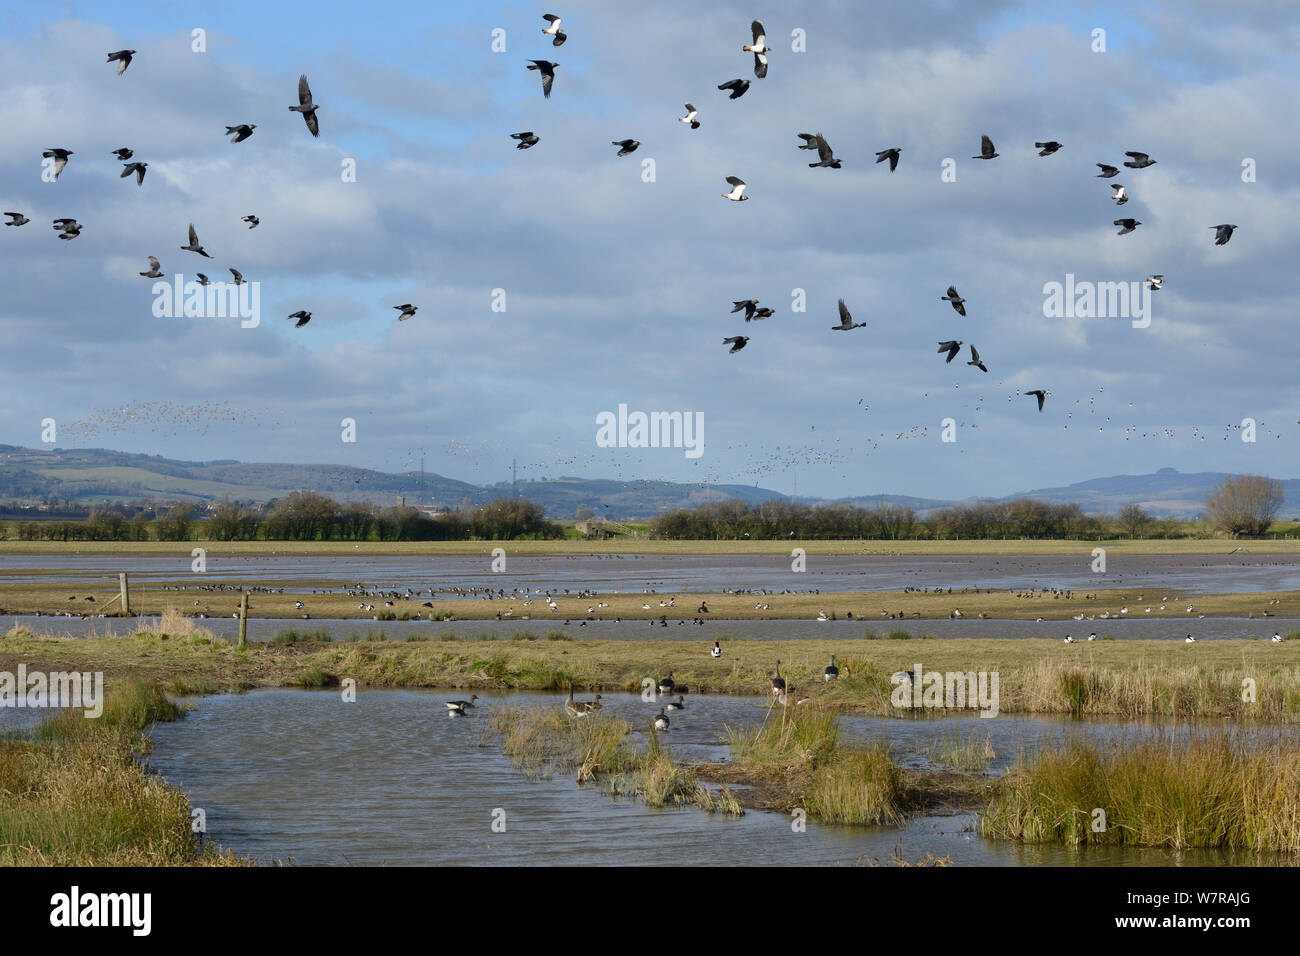 Lapwings (Vanellus vanellus), Jackdaws (Corvus monedula) and Golden plover (Pluvialis apricarius) flying over flooded pastureland with mix of Greylag geese (Anser anser), Shelduck (Tadorna tadorna), Wigeon (Anas penelope), Pintail (anas acuta), Pochard (Aythya ferina) and other wildfowl, Gloucestershire, UK, February. Stock Photo